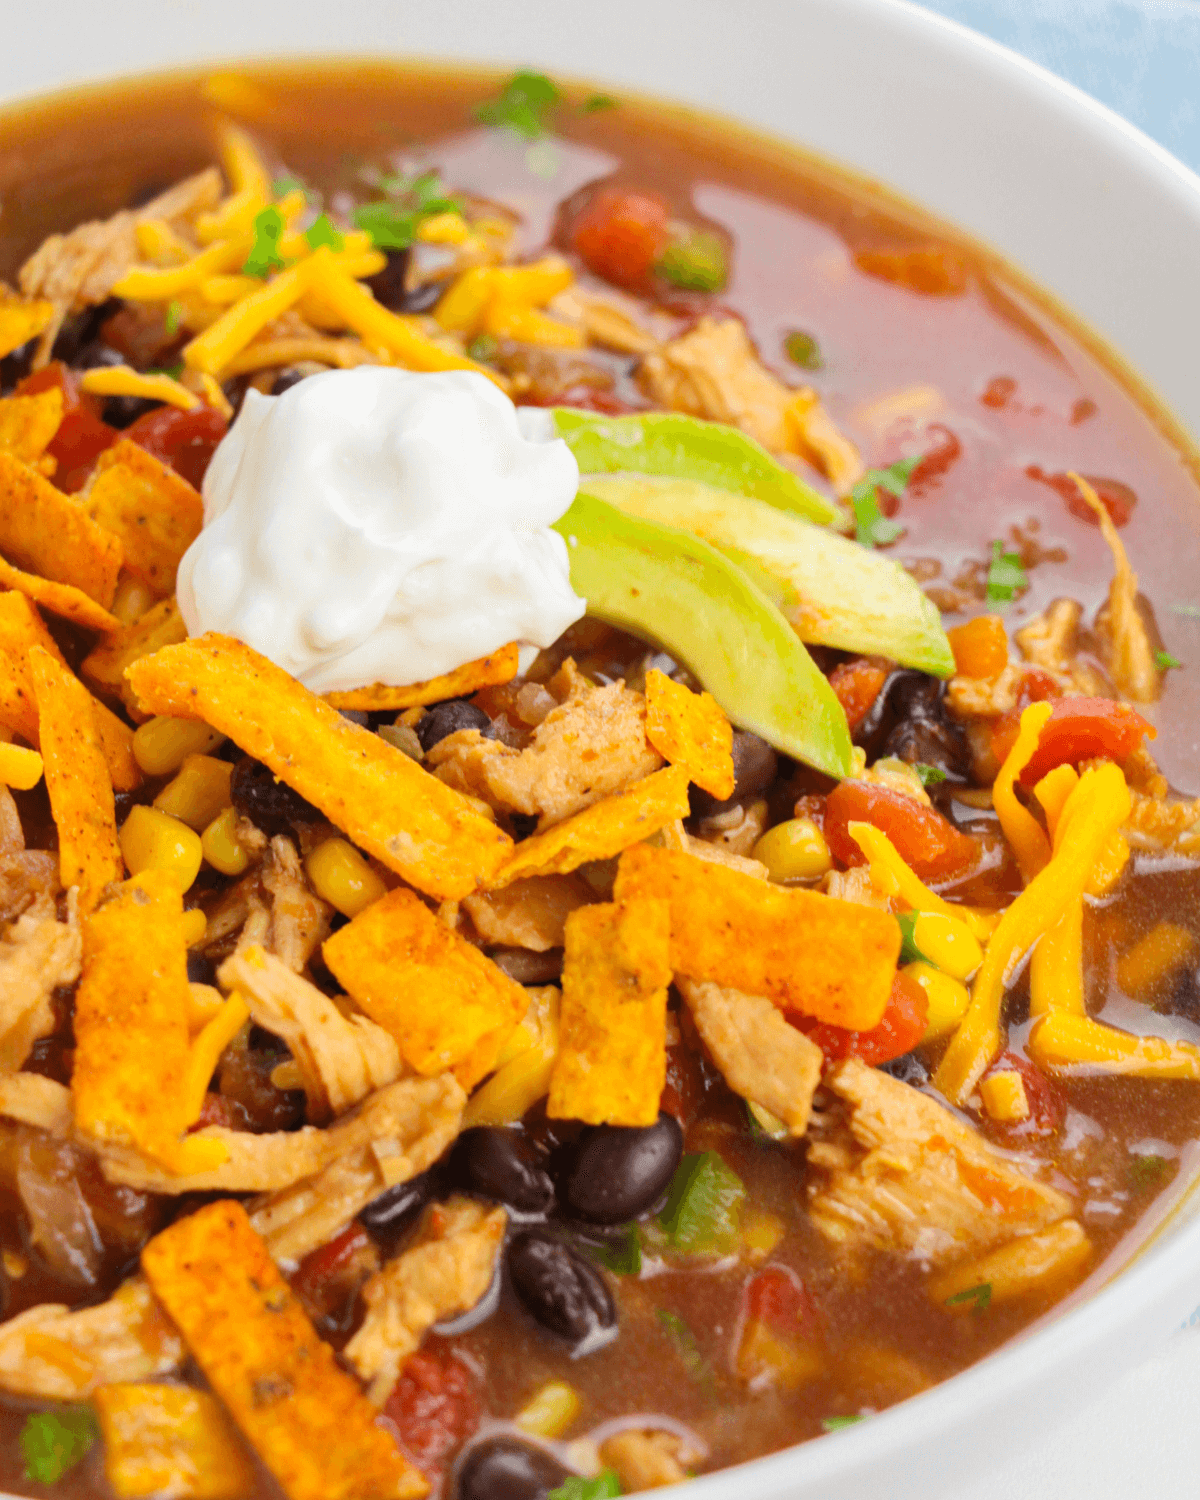 A close up of the rotisserie chicken tortilla soup.